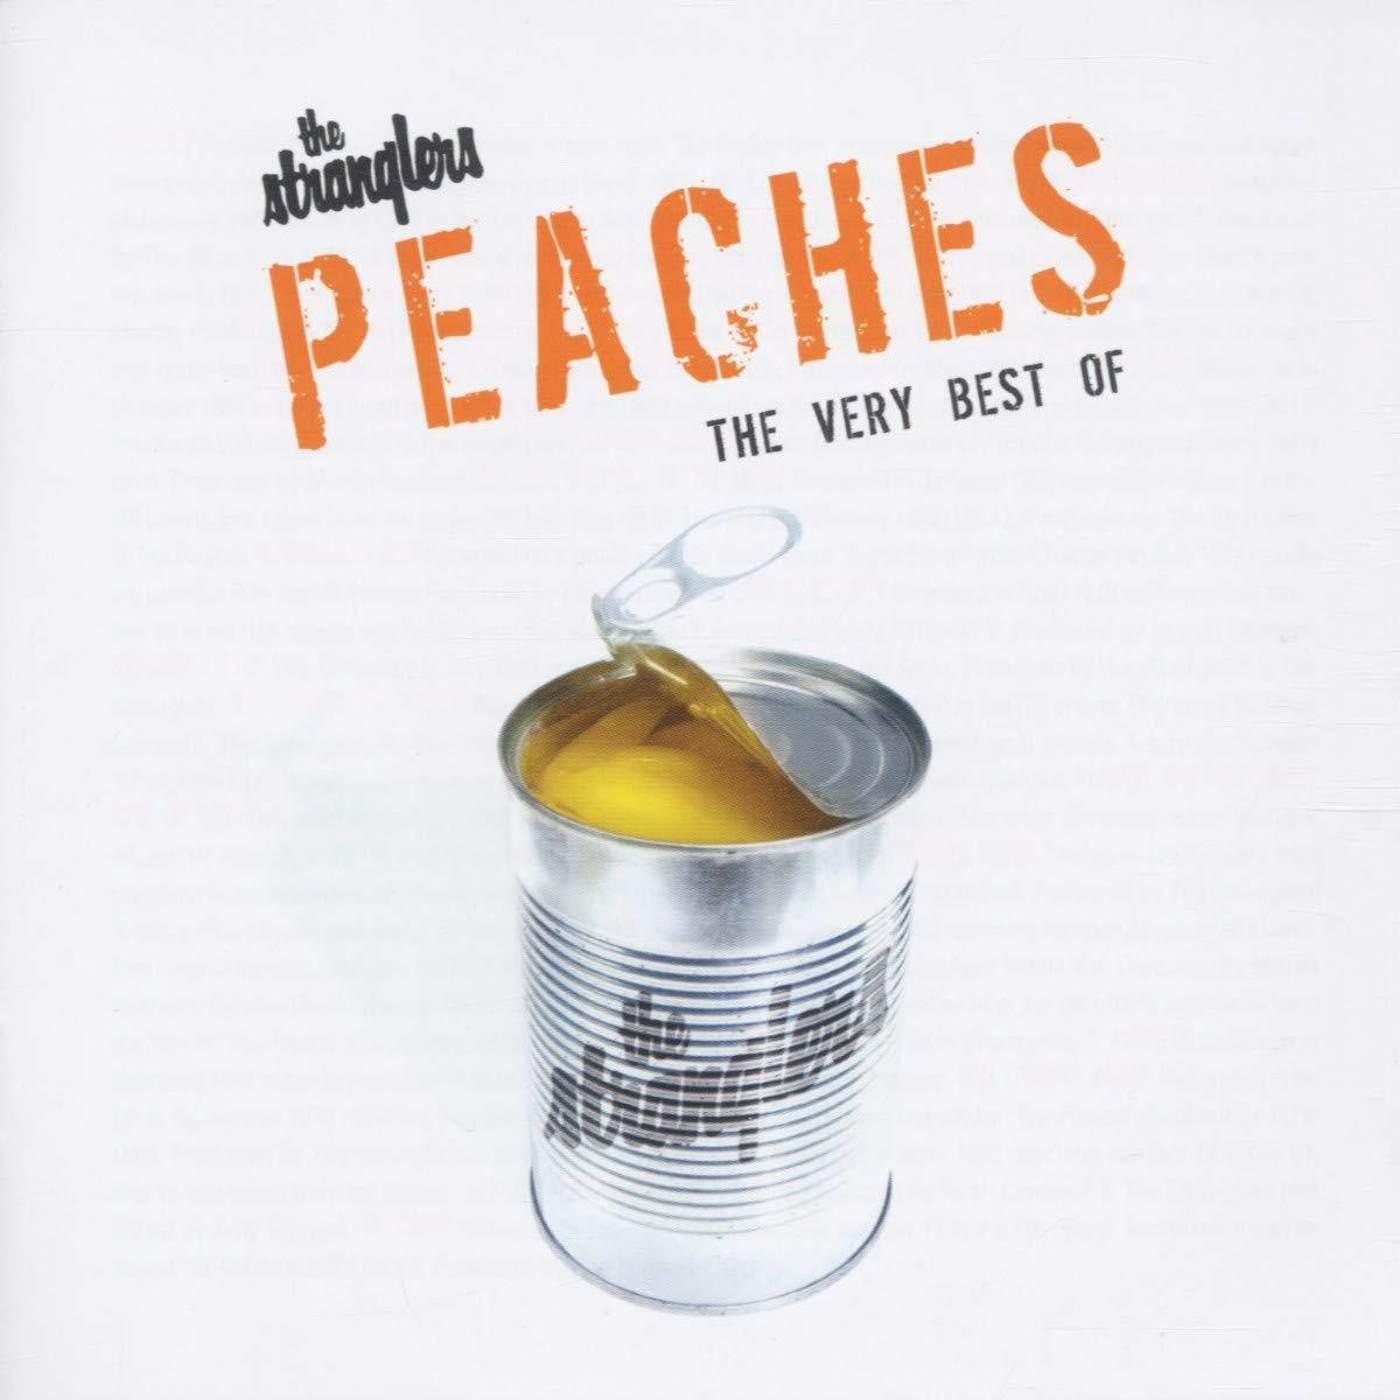 The Stranglers Peaches: Very Best Of